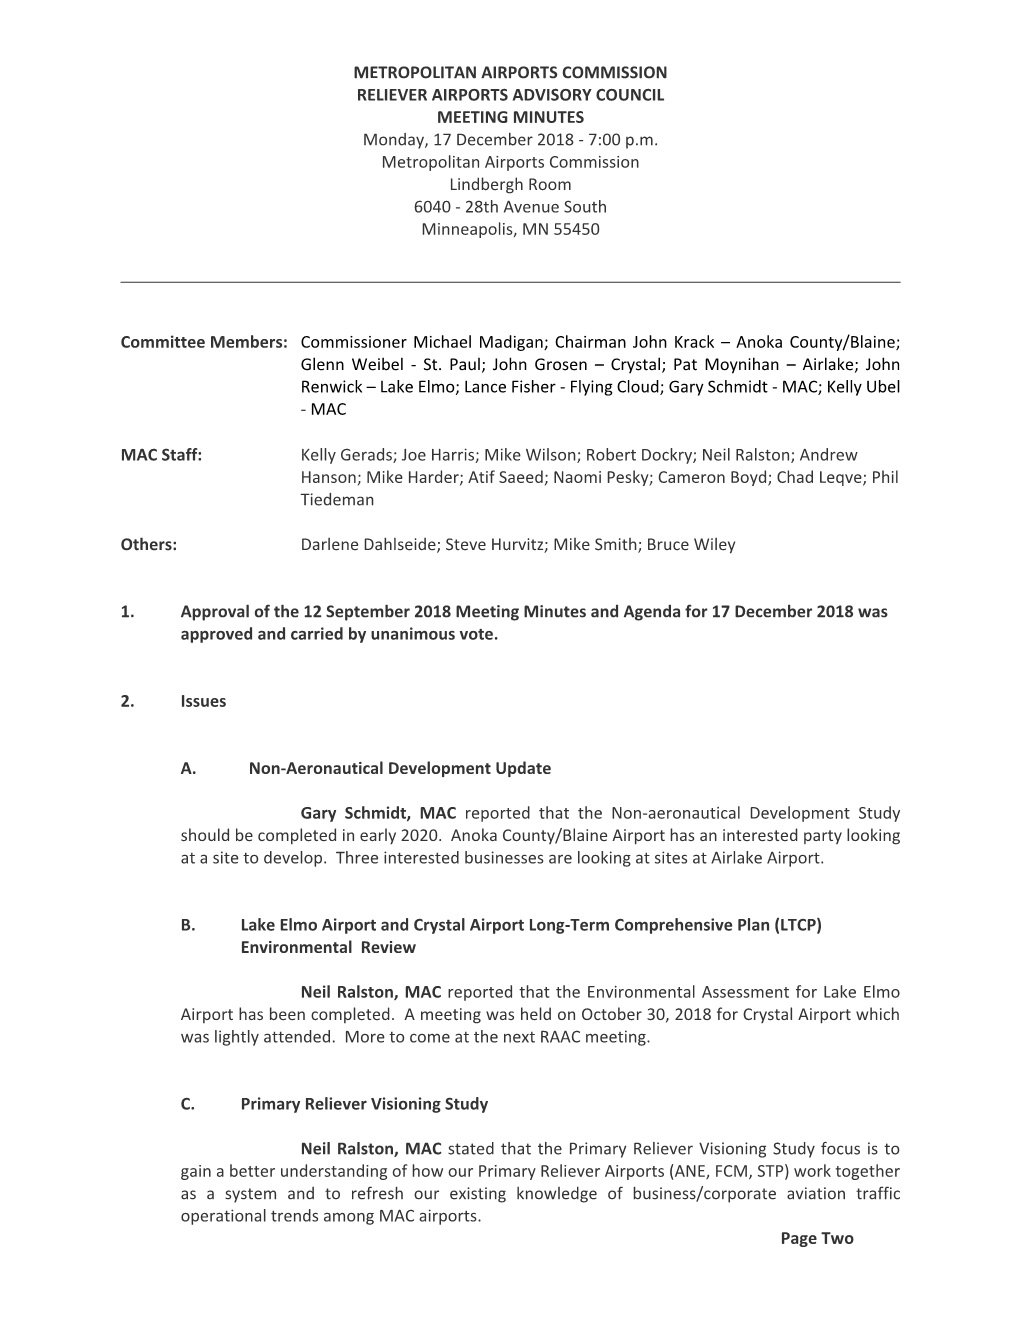 METROPOLITAN AIRPORTS COMMISSION RELIEVER AIRPORTS ADVISORY COUNCIL MEETING MINUTES Monday, 17 December 2018 - 7:00 P.M